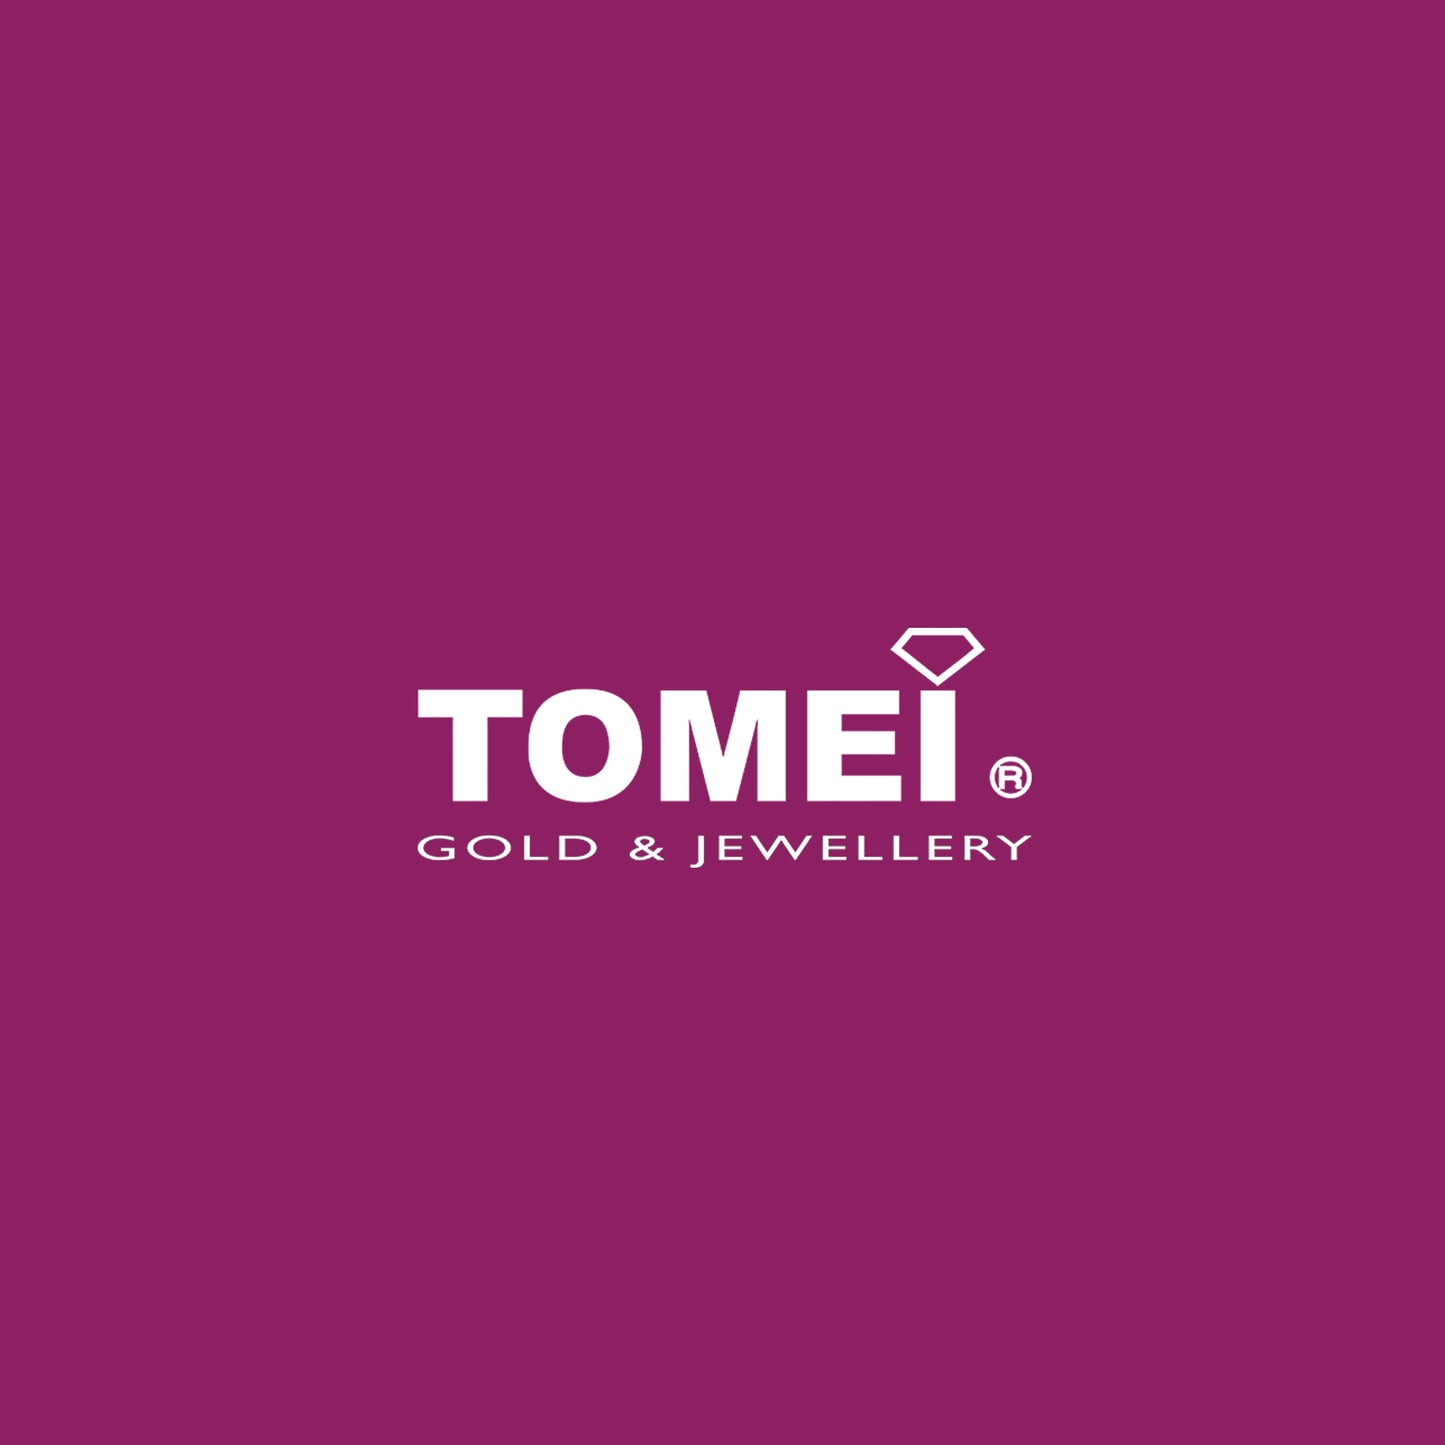 TOMEI Quadrated with Spellbound Effulgence Earrings, Diamond White Gold 750